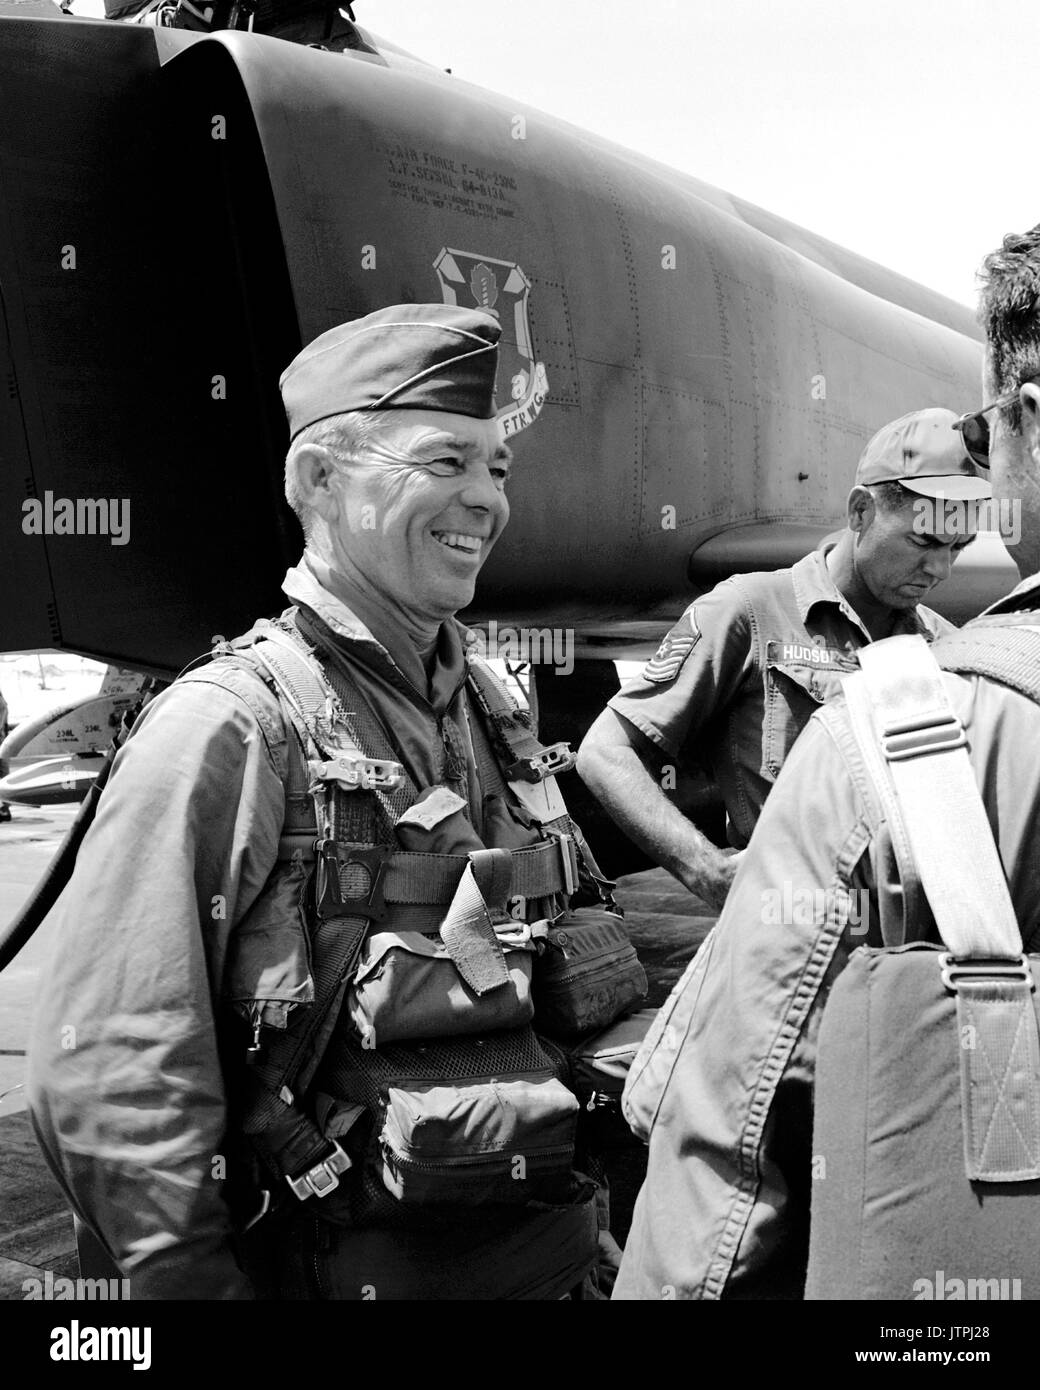 COL W.E. Davis Jr., commander, 12th Tactical Fighter Wing, talks with other pilots after completing his 200th and last combat mission over North and South Vietnam.  The mission consisted of attacking a Viet Cong concentration area, destroying military fortifications and inflicting heavy damage. Stock Photo